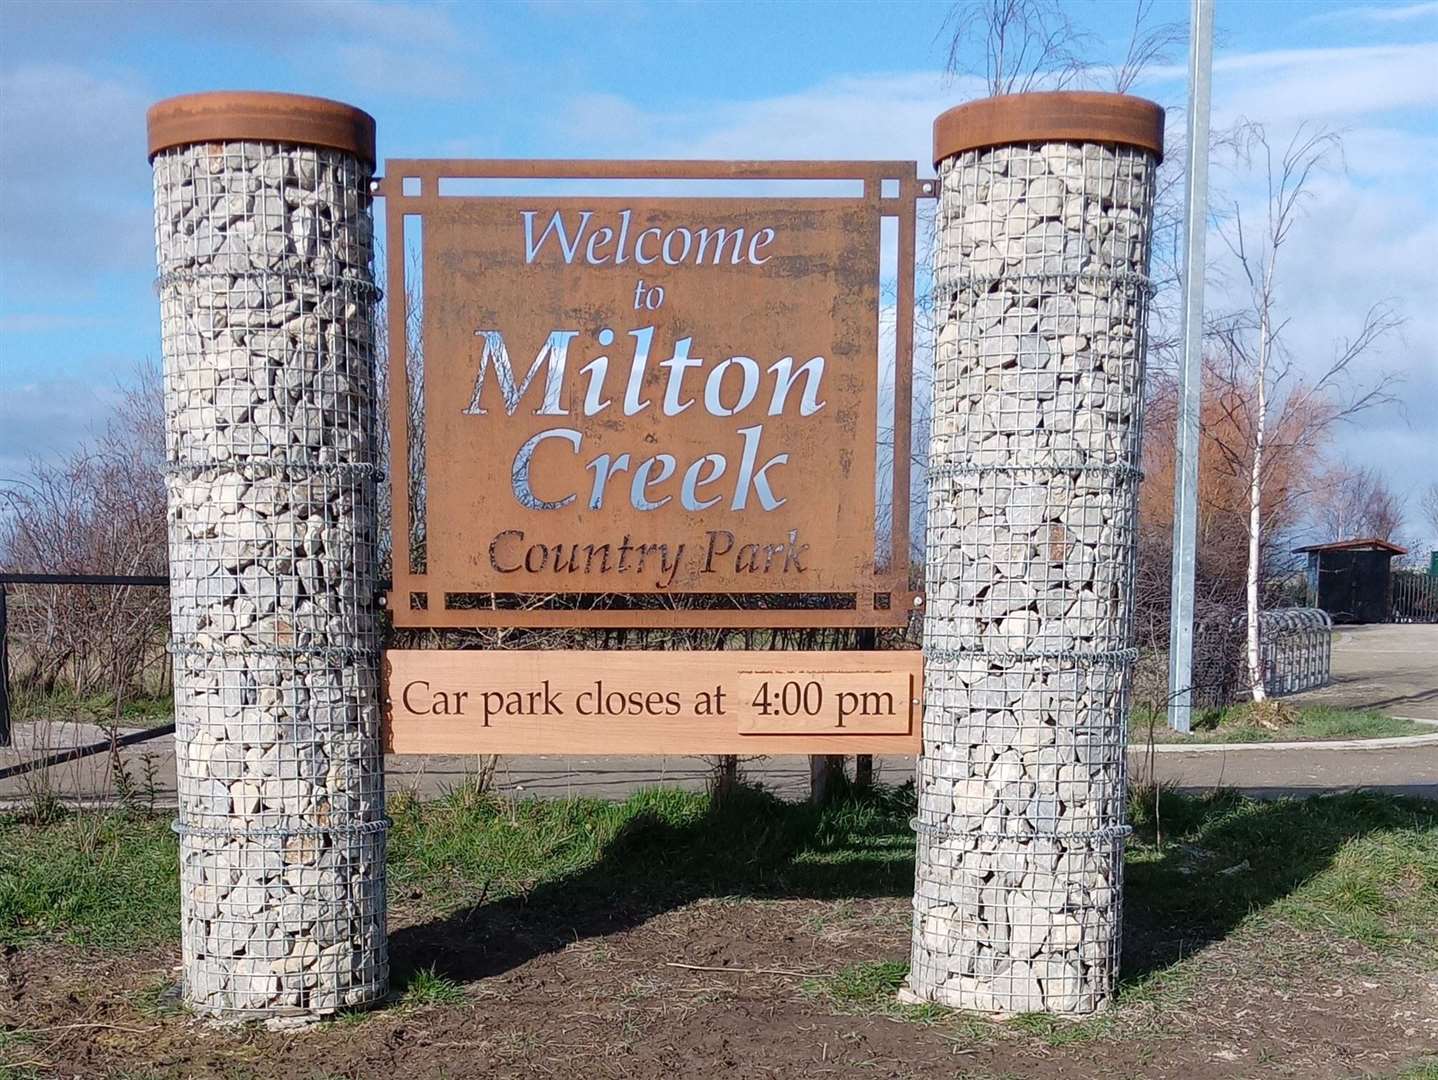 The new sign at Milton Creek Country Park. Picture: Cllr Steve Davey